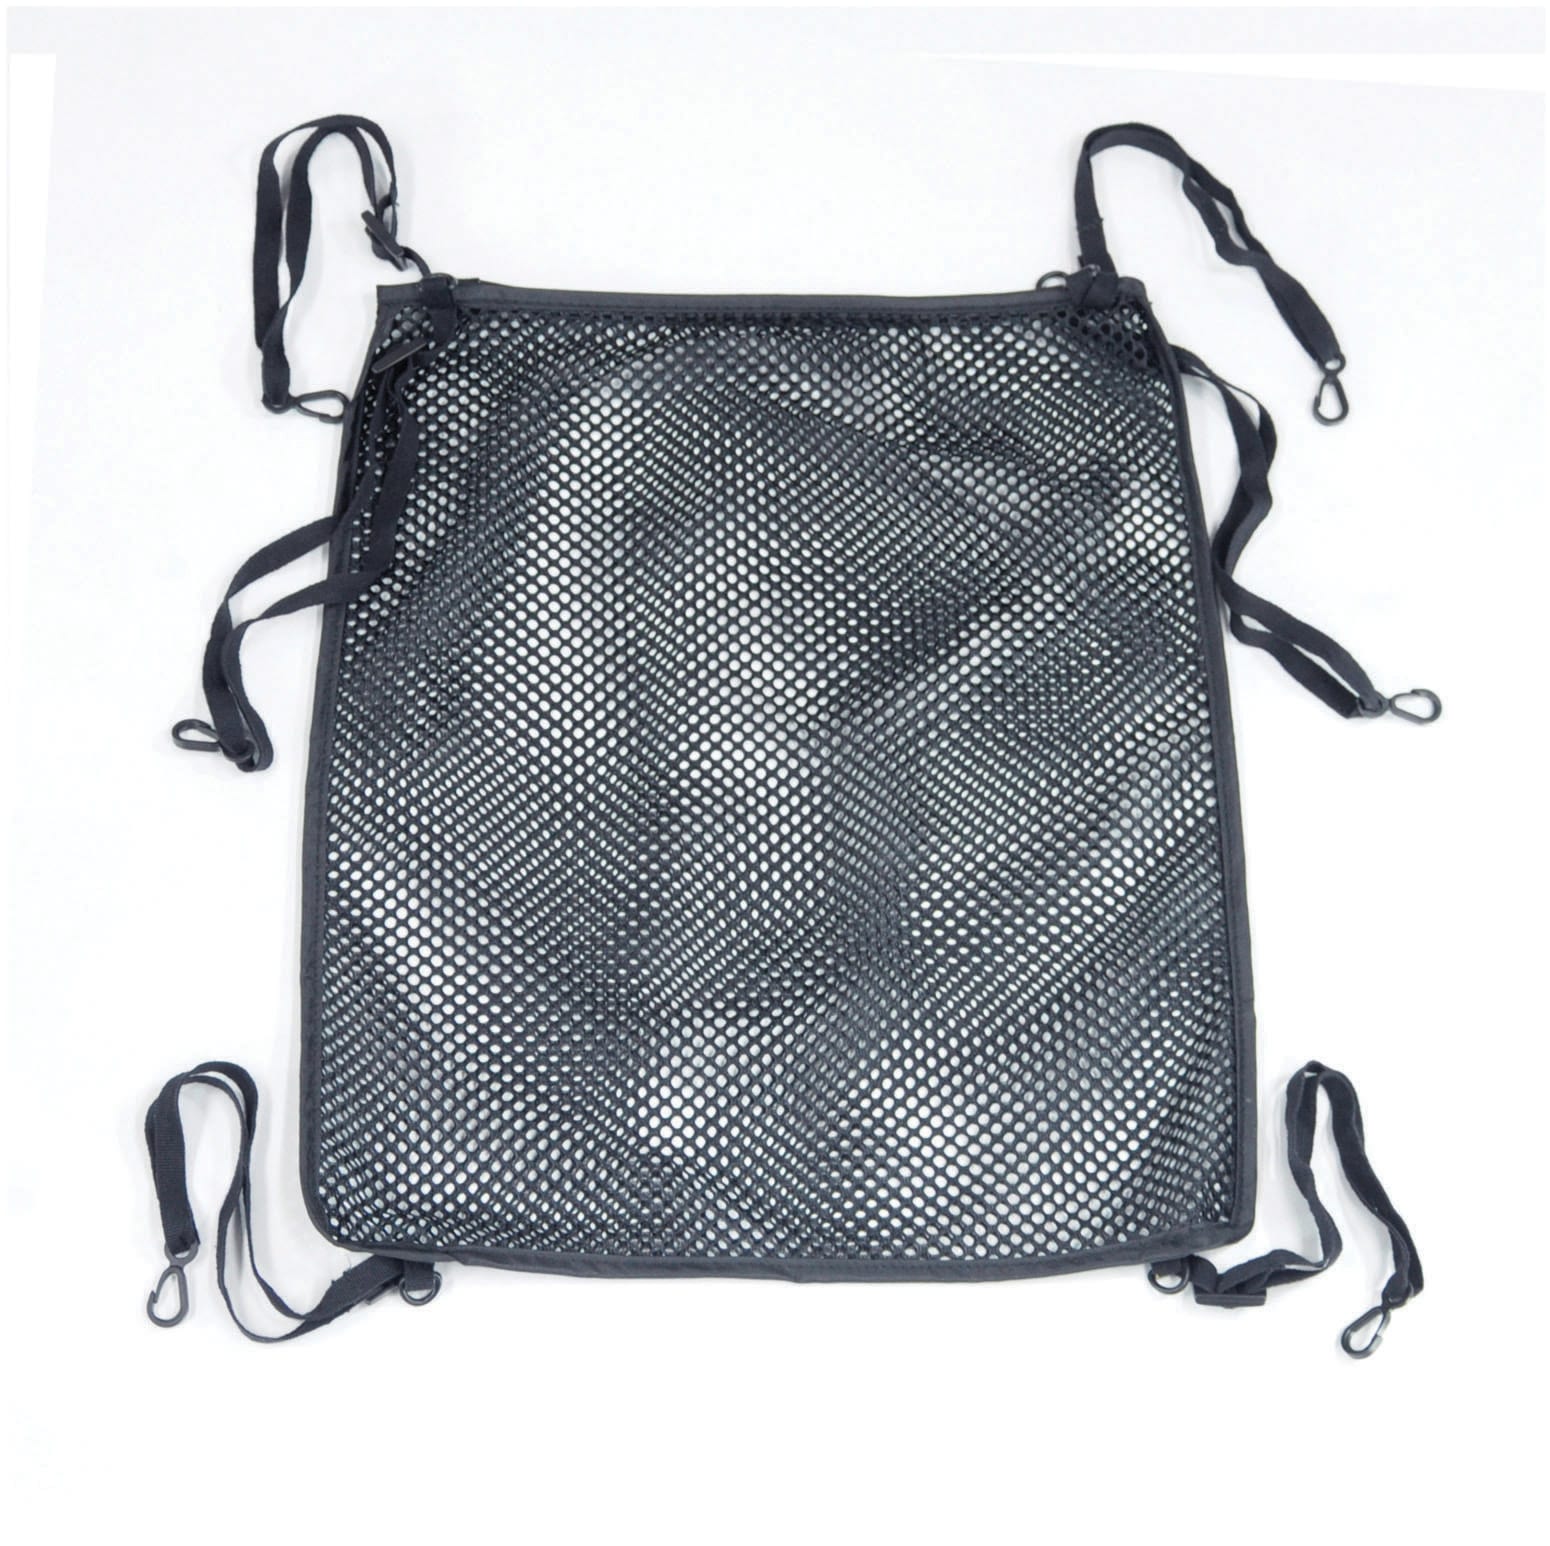 Net bag for Walking Frames - Life and Mobility